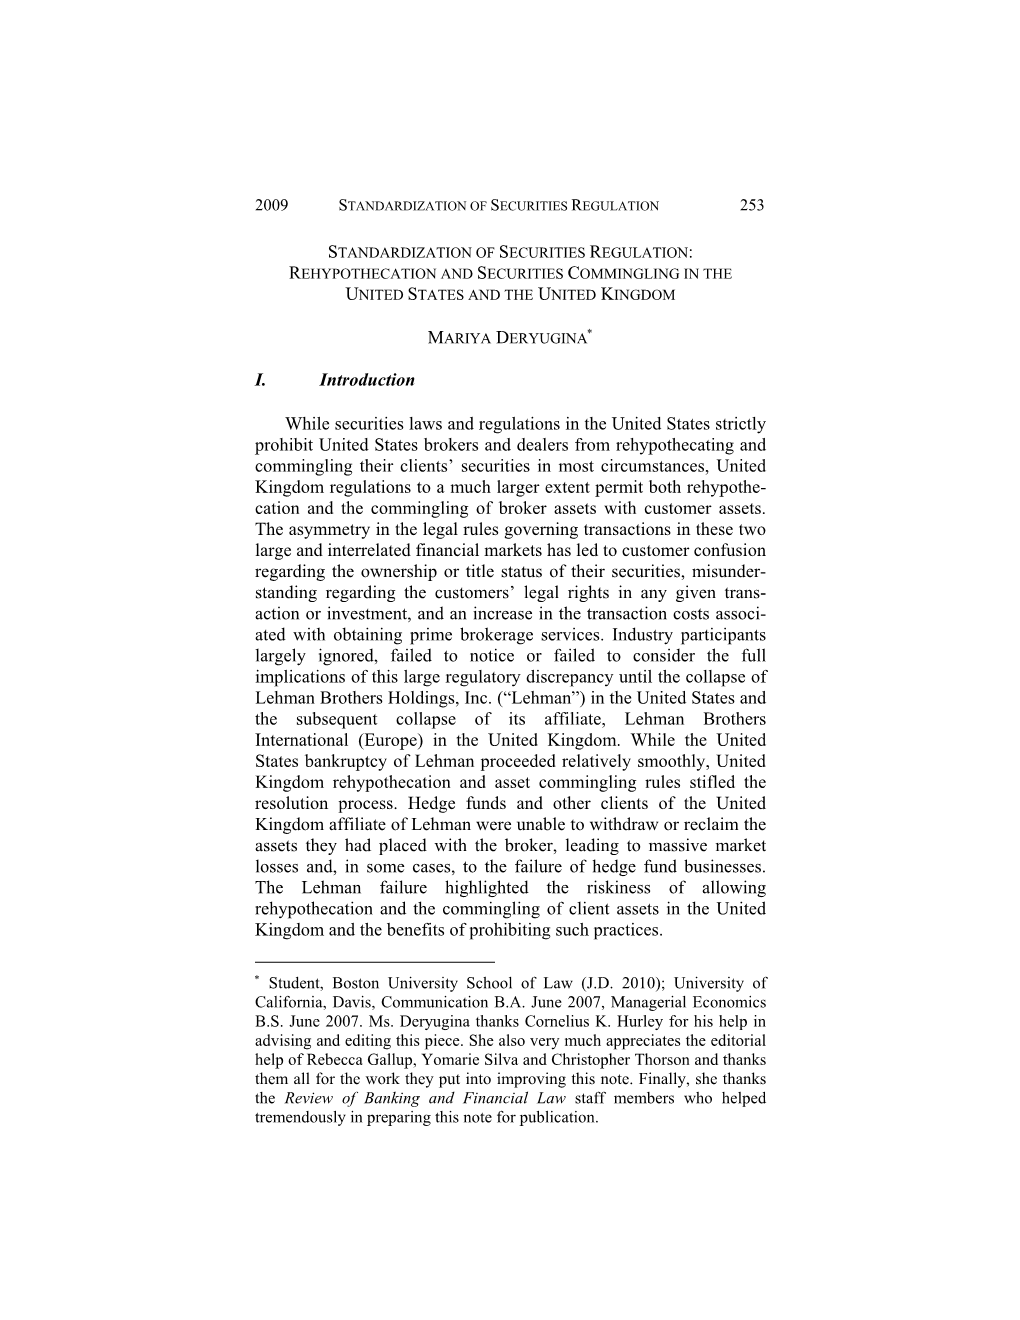 Rehypothecation and Securities Commingling in the United States and the United Kingdom